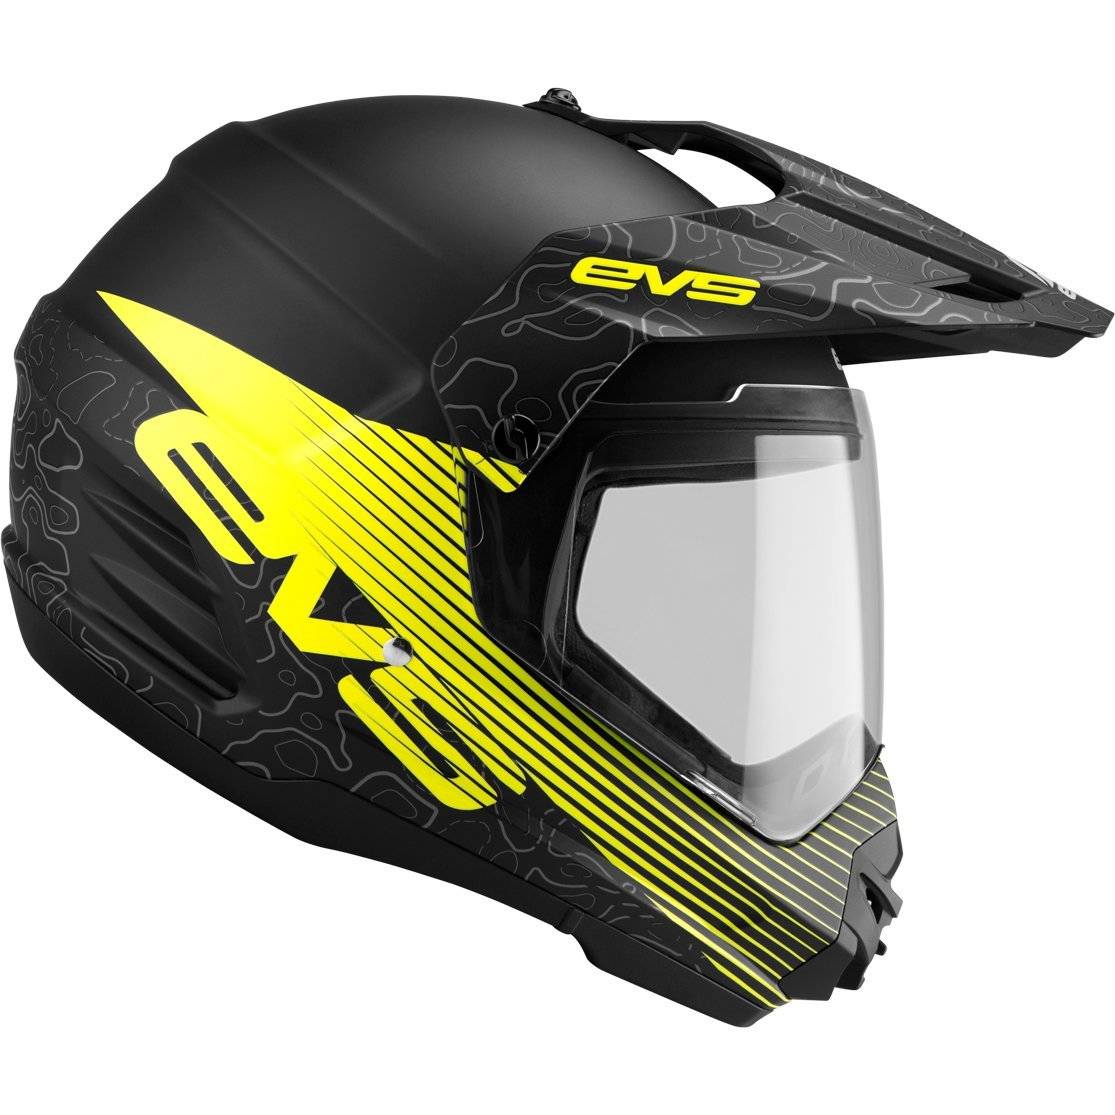 Large HJC DS-X1 Tactic Adult Snowmobile Helmet with Electric Shield MC-3HSF 